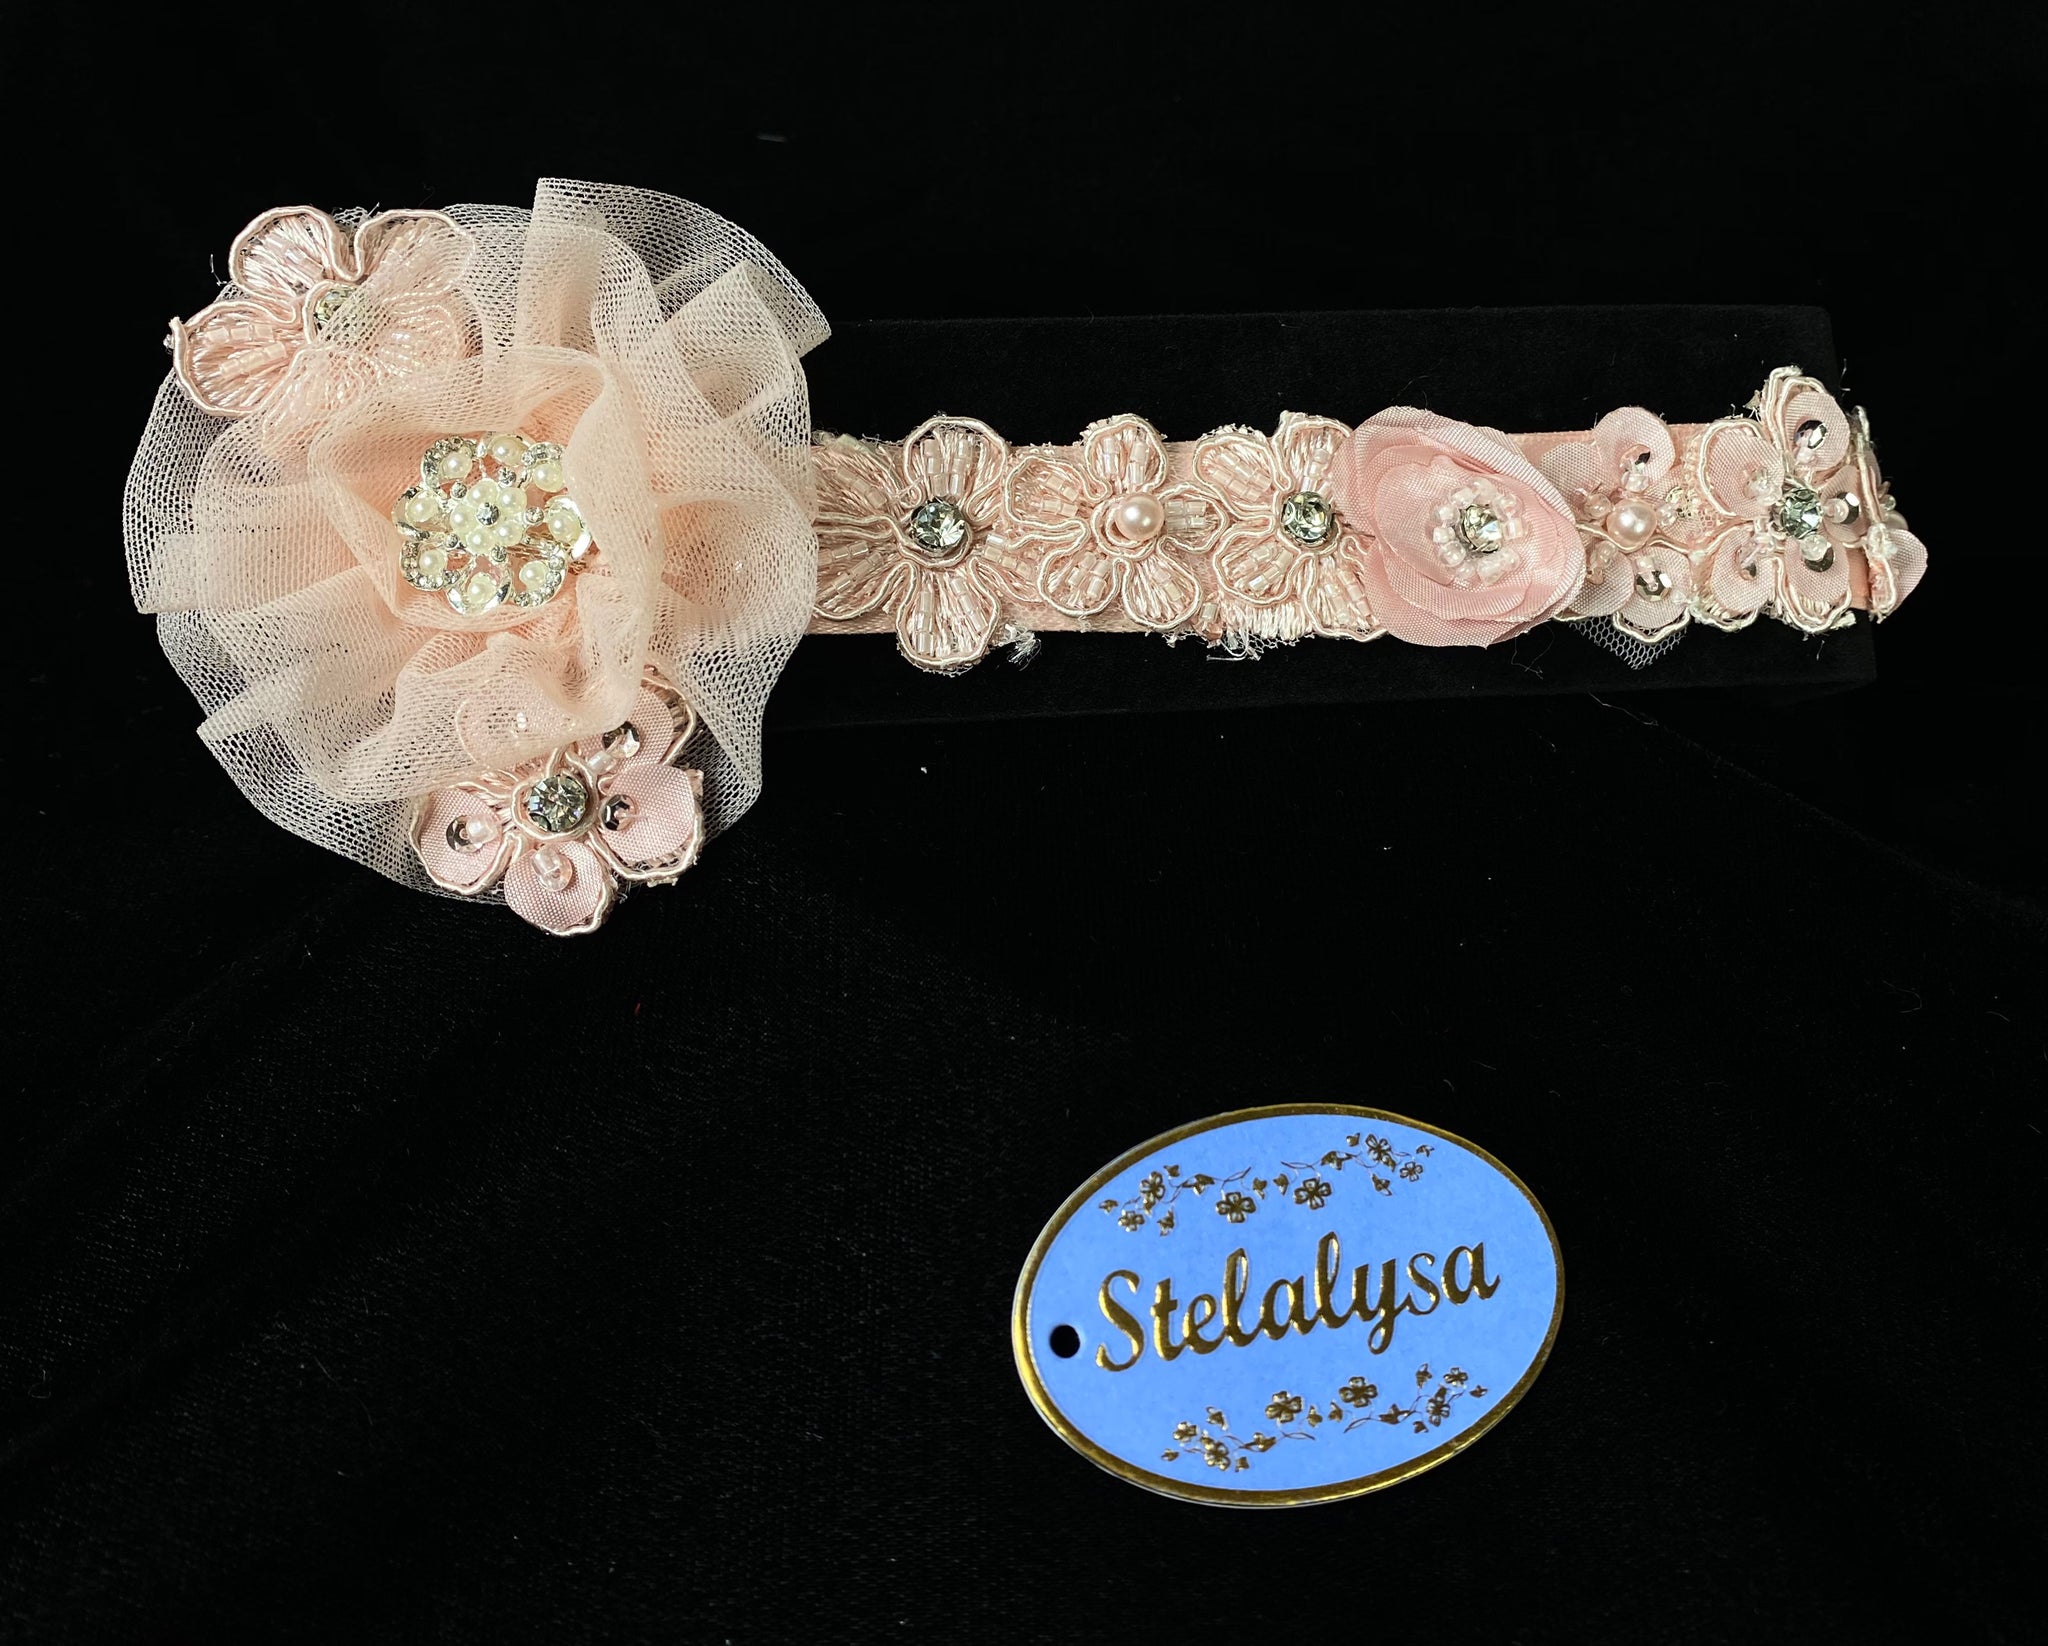 Headwrap - Pink Ribbon with Pink Tulle Flower with Pearls & Rhinestones  This is an elegant handmade and one-of-a-kind Pink headwrap with a little pink tulle flowers with pearls and rhinestones.  The headwrap is made of a soft elastic.  This headwrap can be worn with dresses from Stelalysa's Celebration/Pageant Collection and for any occasion!  It fits best on ages 1-6.